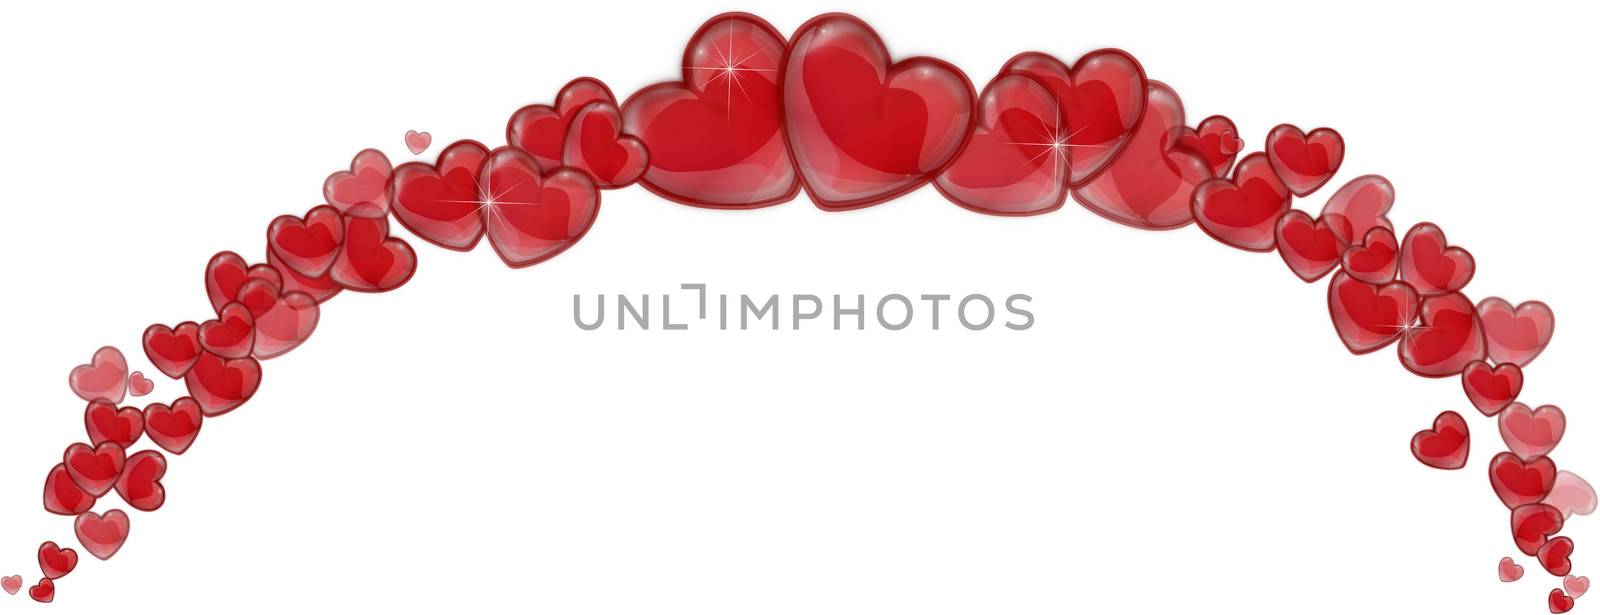 Frame of red hearts on a white background by sylwia